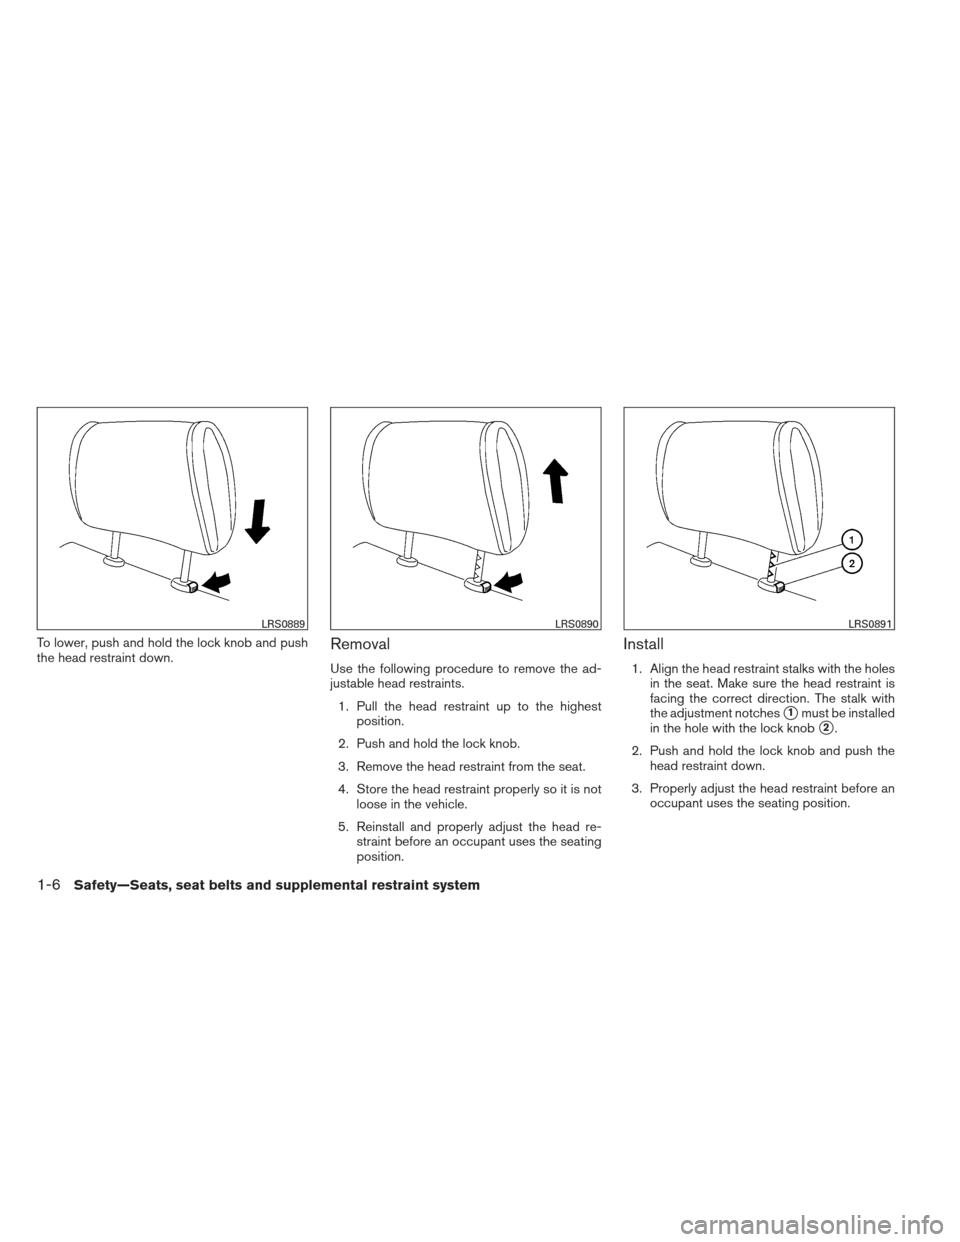 NISSAN XTERRA 2013 N50 / 2.G Owners Manual To lower, push and hold the lock knob and push
the head restraint down.Removal
Use the following procedure to remove the ad-
justable head restraints.1. Pull the head restraint up to the highest posit